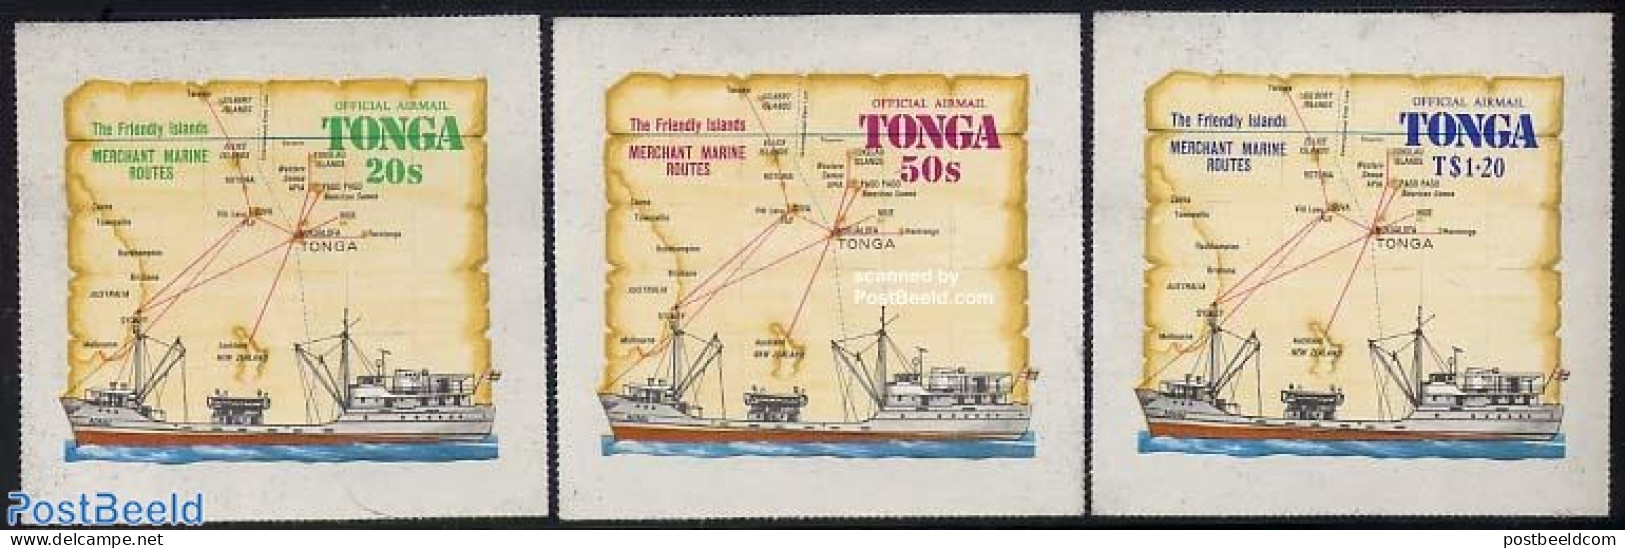 Tonga 1972 On Service, Commercial Fleet 3v, Mint NH, Transport - Various - Ships And Boats - Maps - Ships